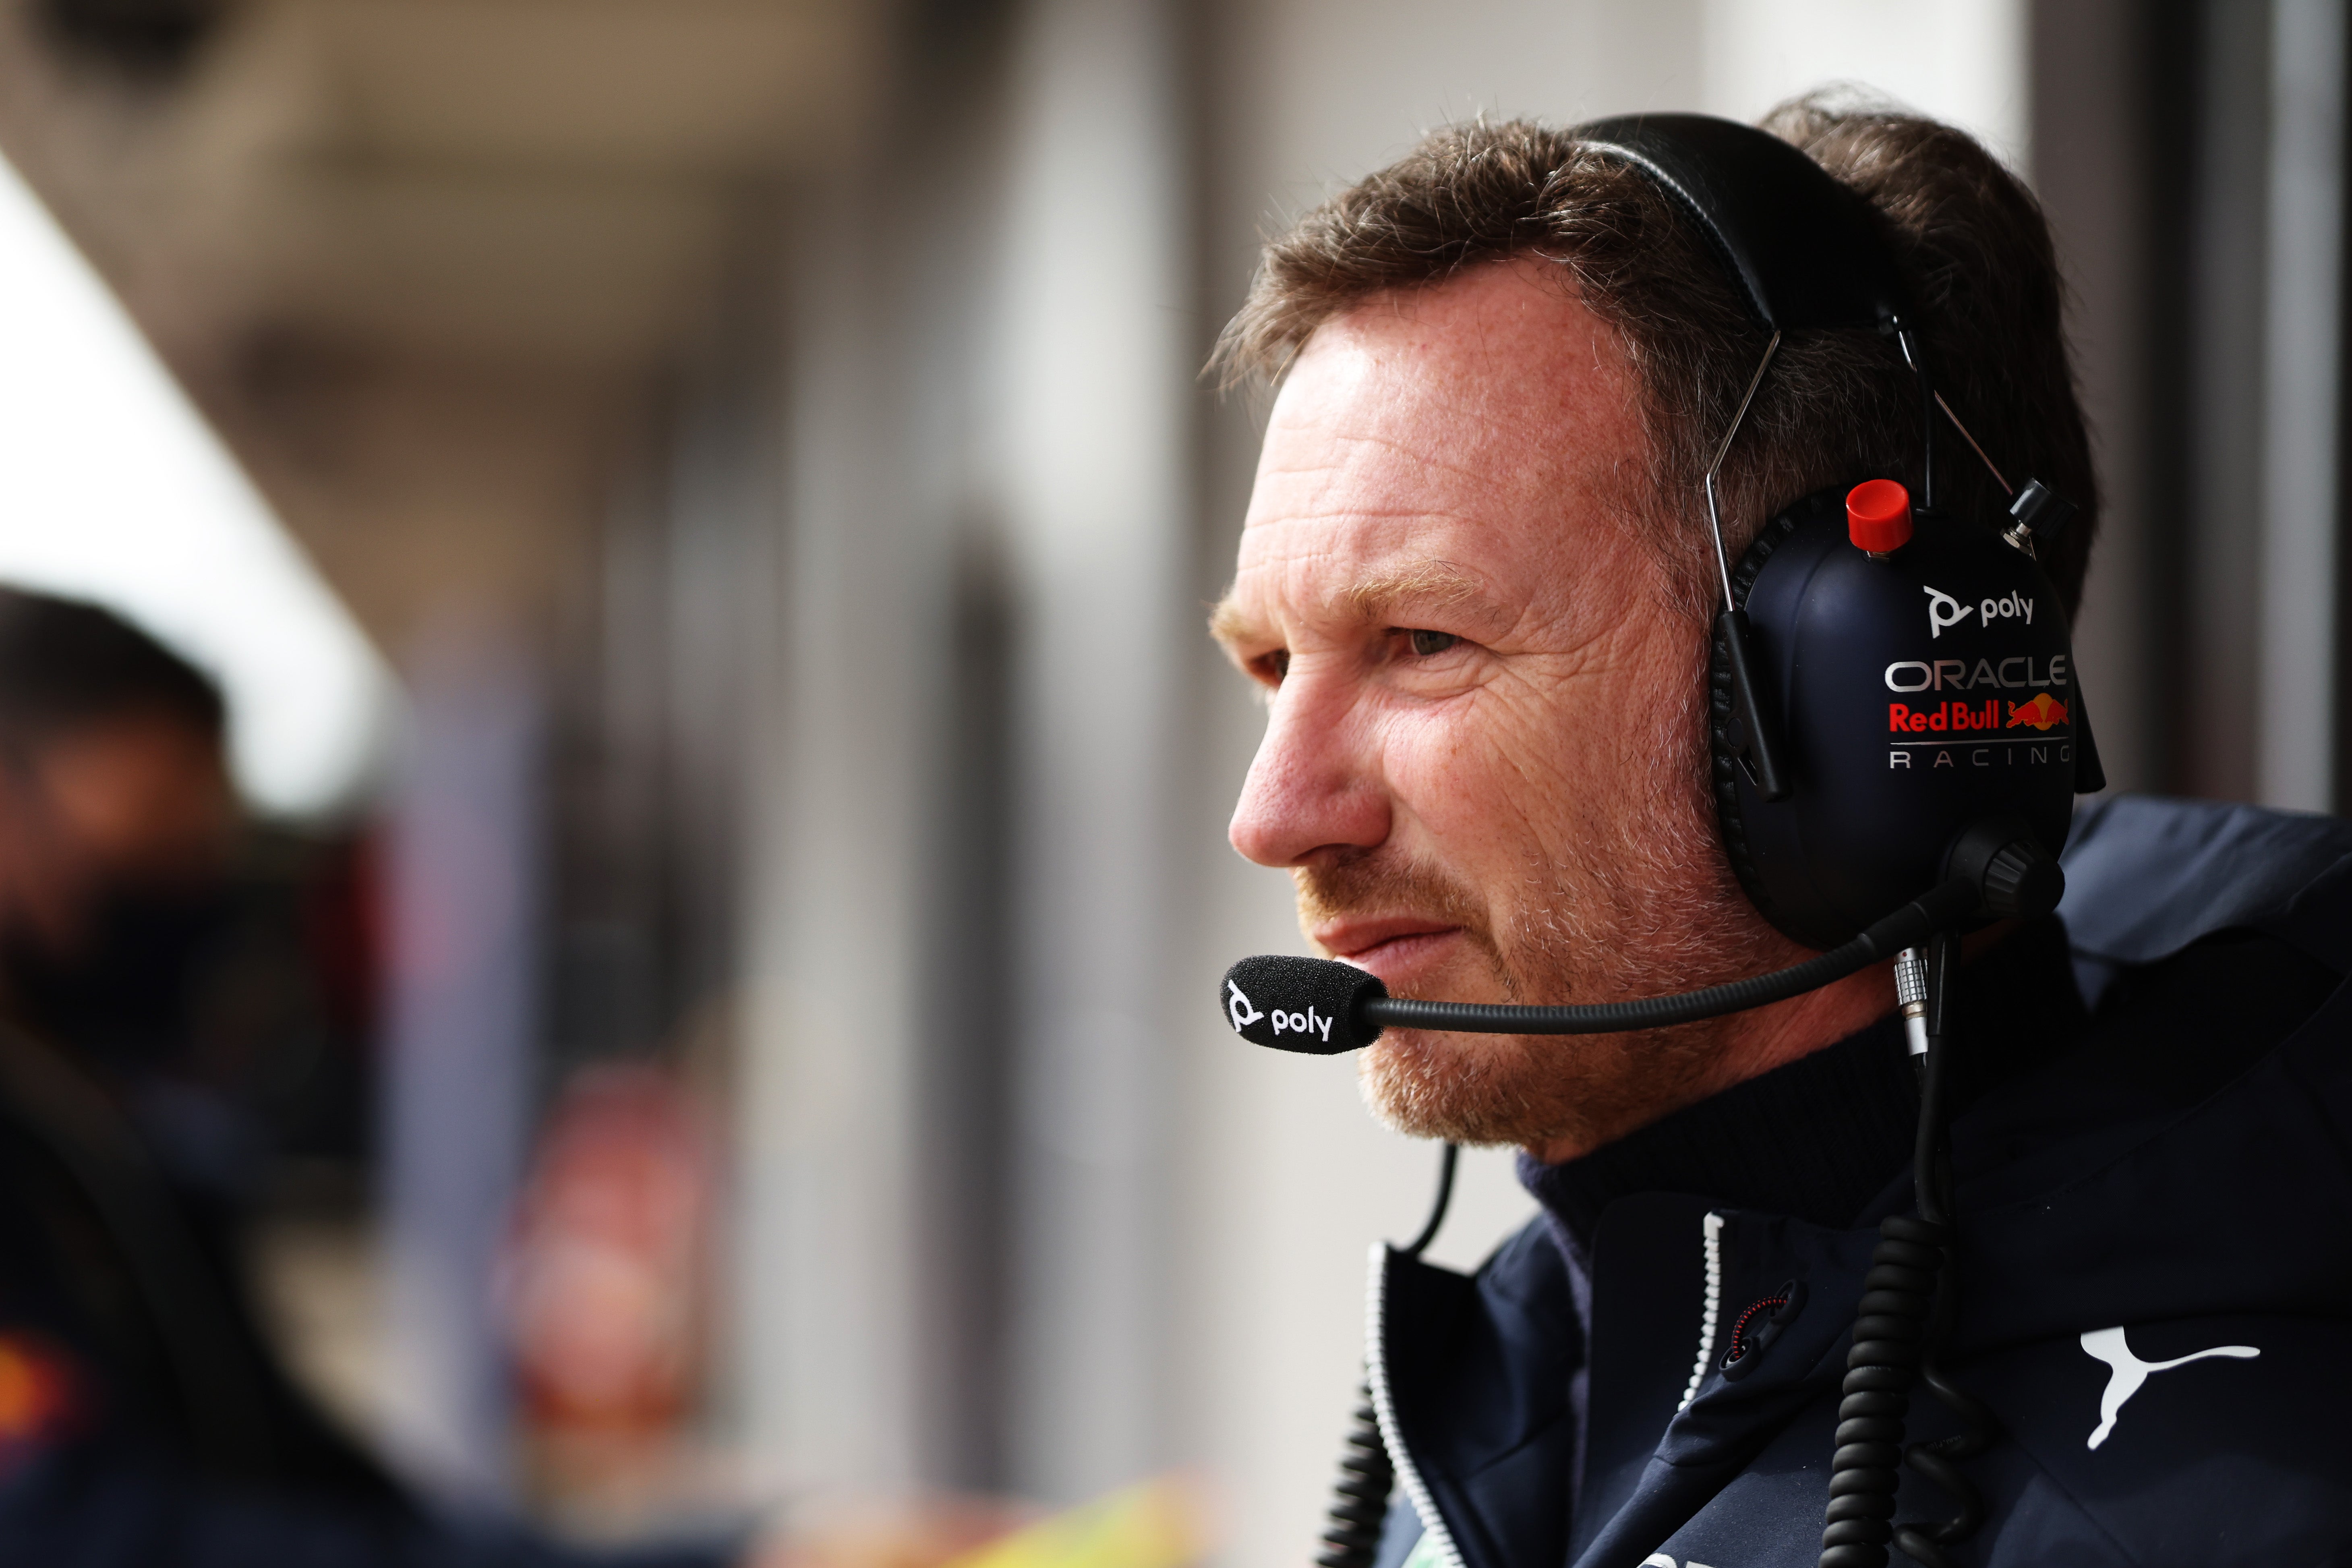 Christian Horner has accused rivals Mercedes of putting pressure on the FIA